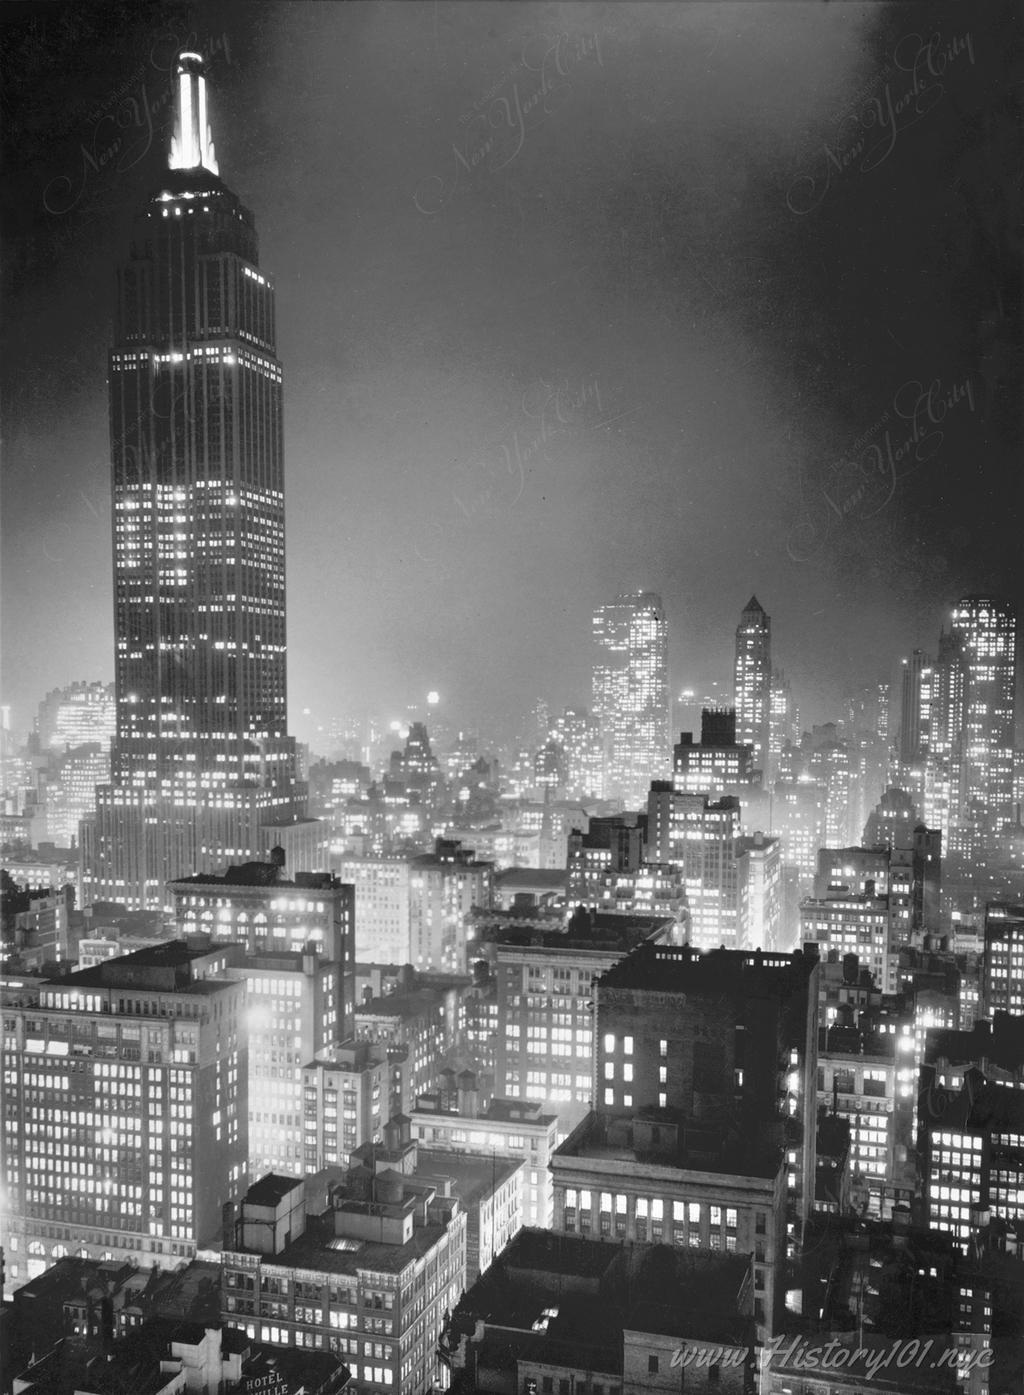 Photograph of the Empire State Building and surrounding skyscrapers illuminated at night.